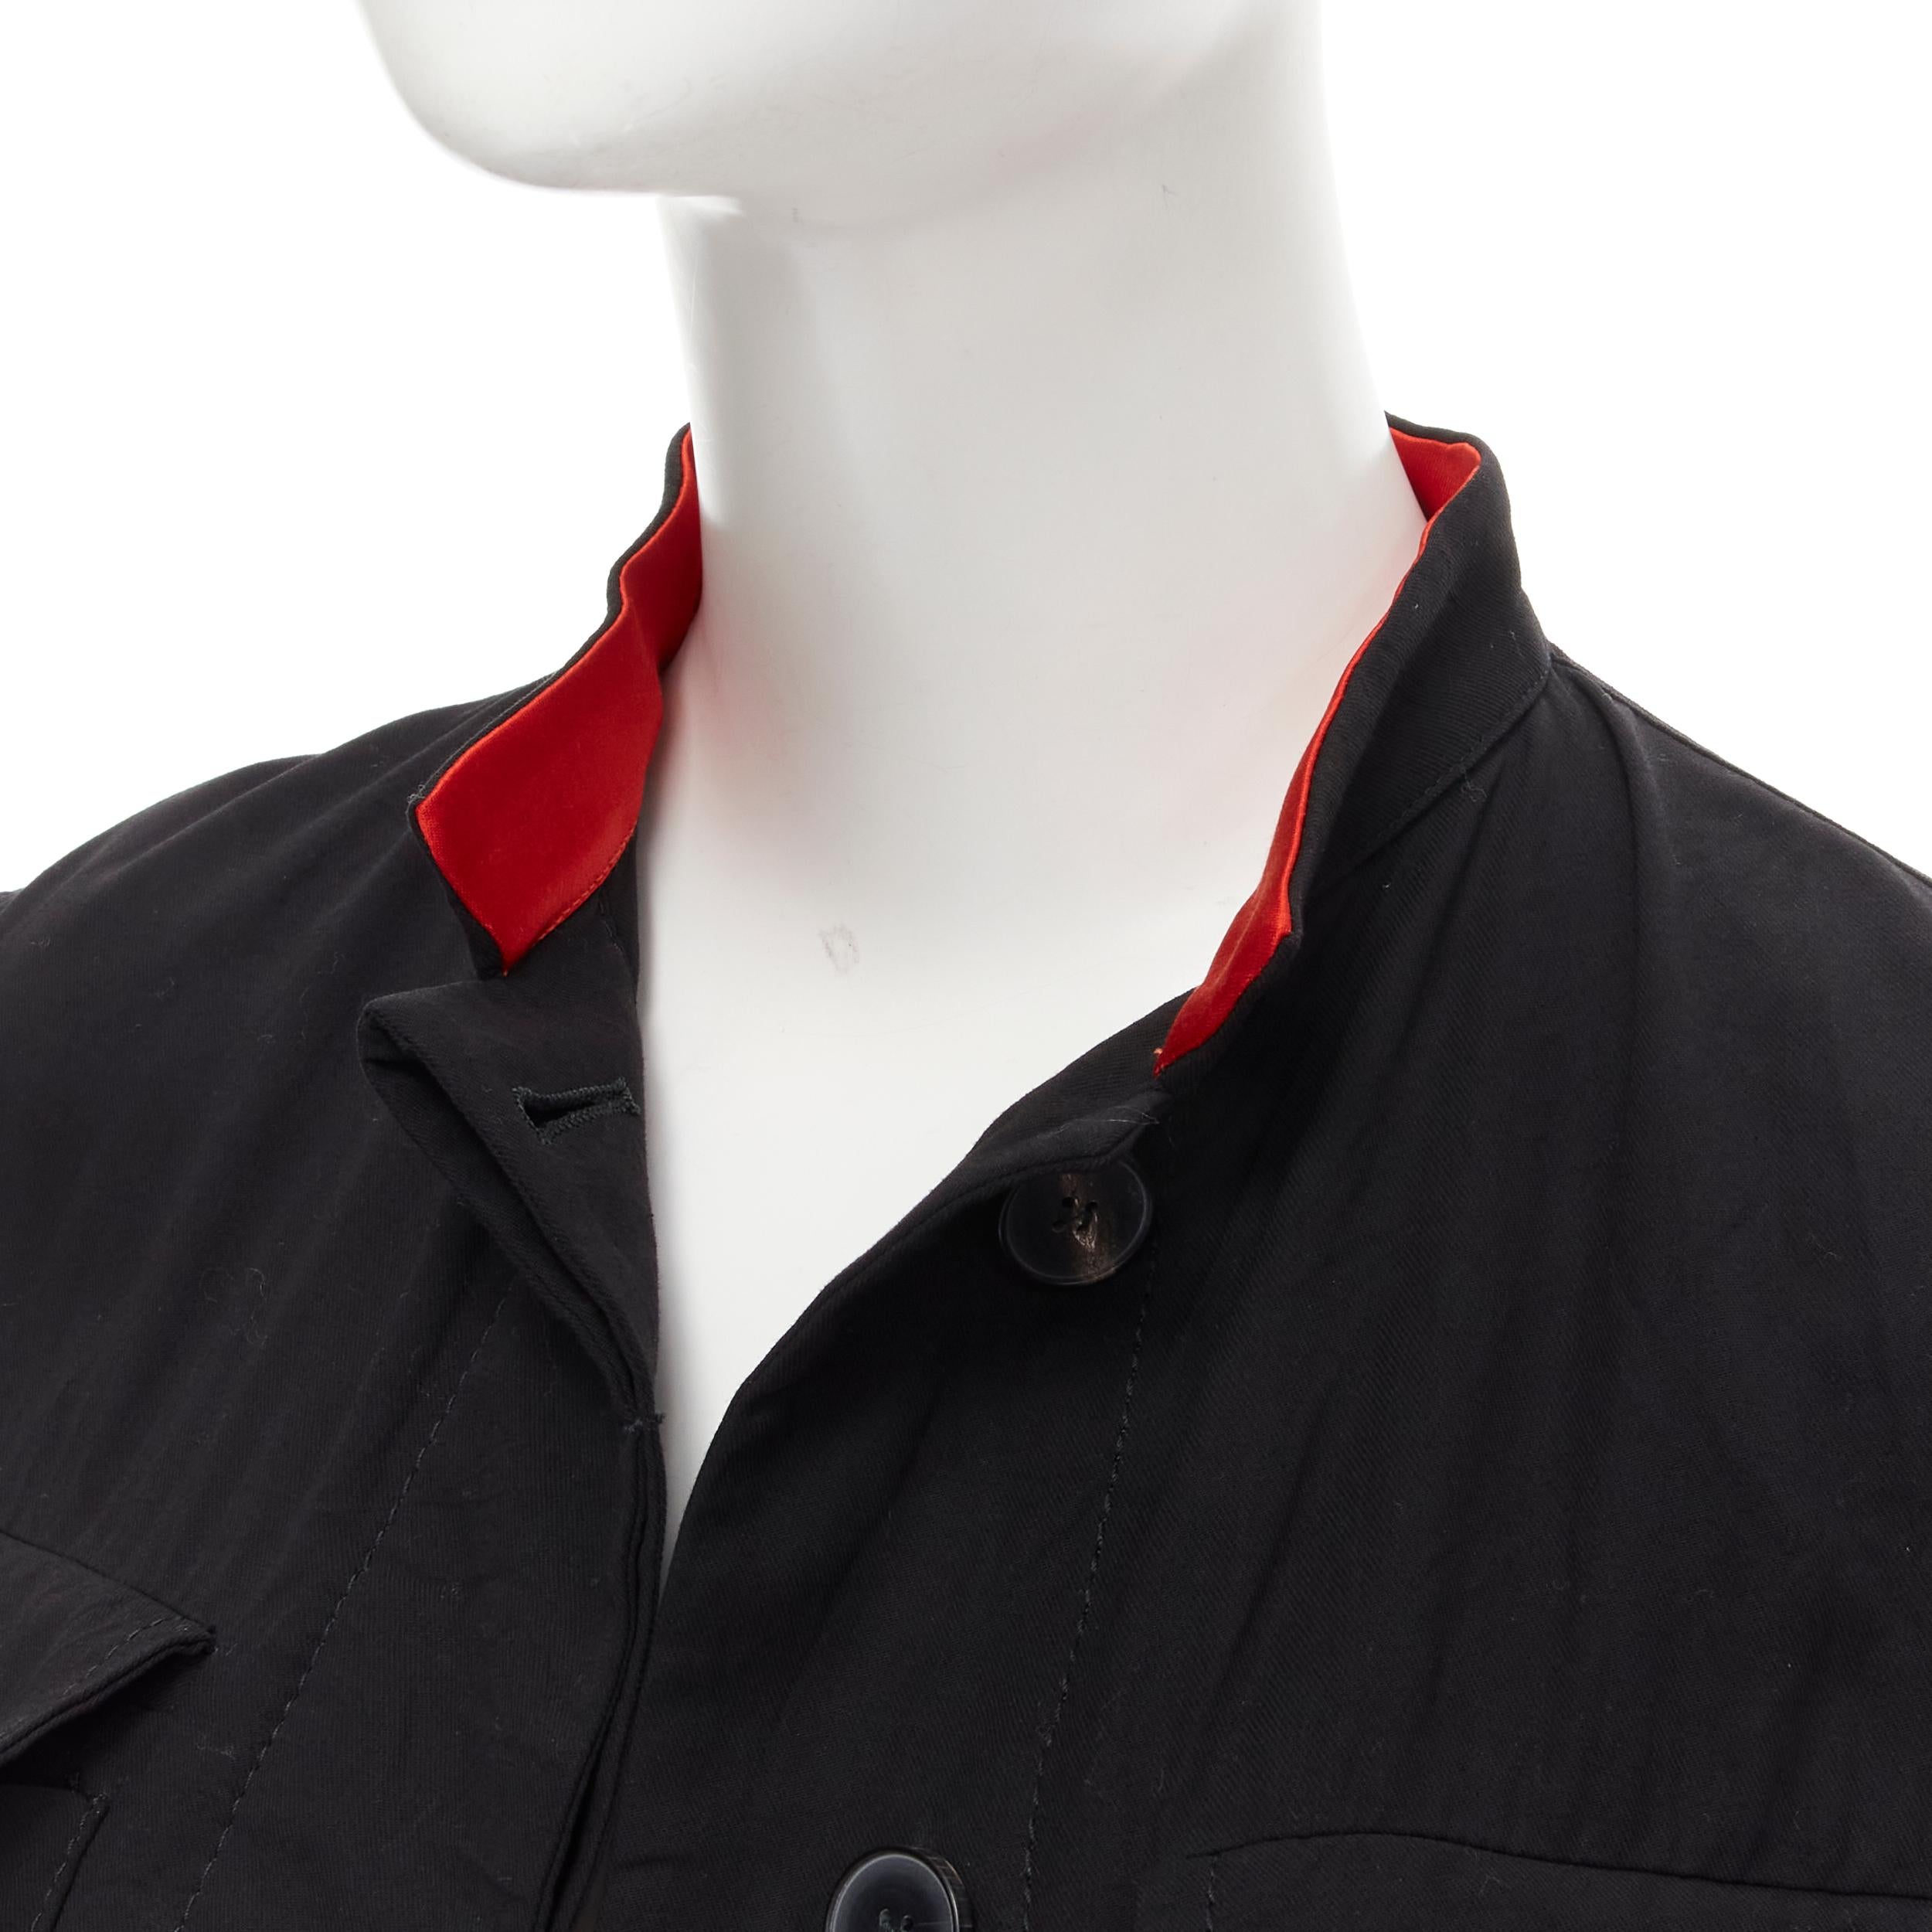 HAIDER ACKERMANN black cotton flap pockets red mandarin collar jacket FR34 XS 
Reference: MELK/A00026 
Brand: Haider Ackermann 
Material: Cotton 
Color: Black 
Pattern: Solid 
Closure: Button 
Extra Detail: 4 flap cargo pocket. Concealed buttons.